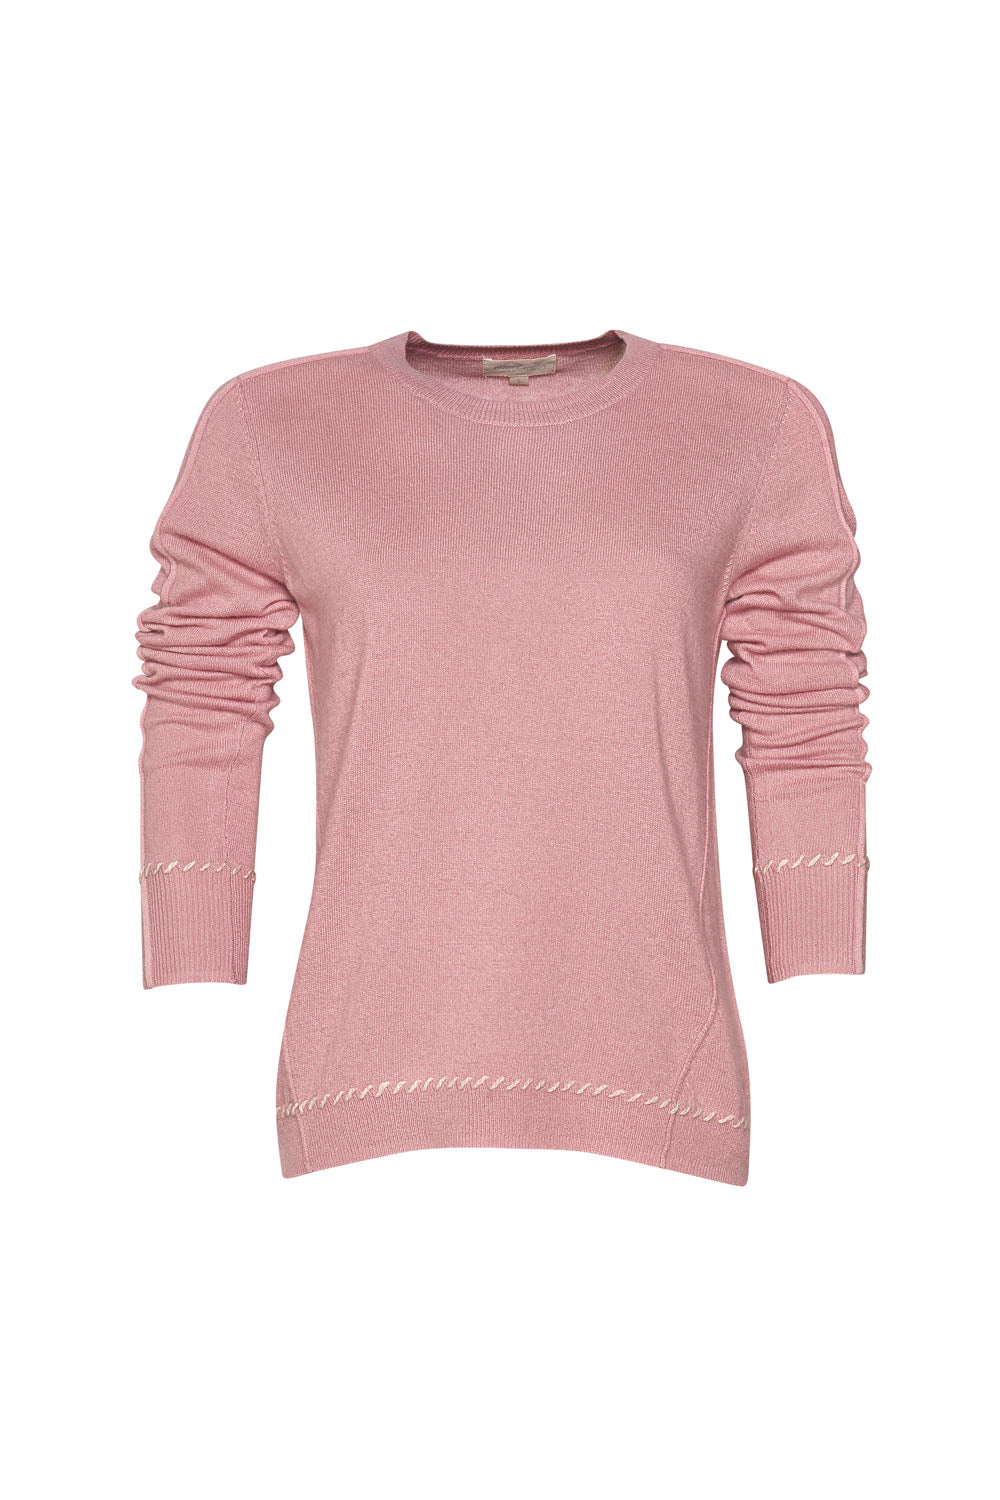 Whipped Up Sweater | Dusky Pink